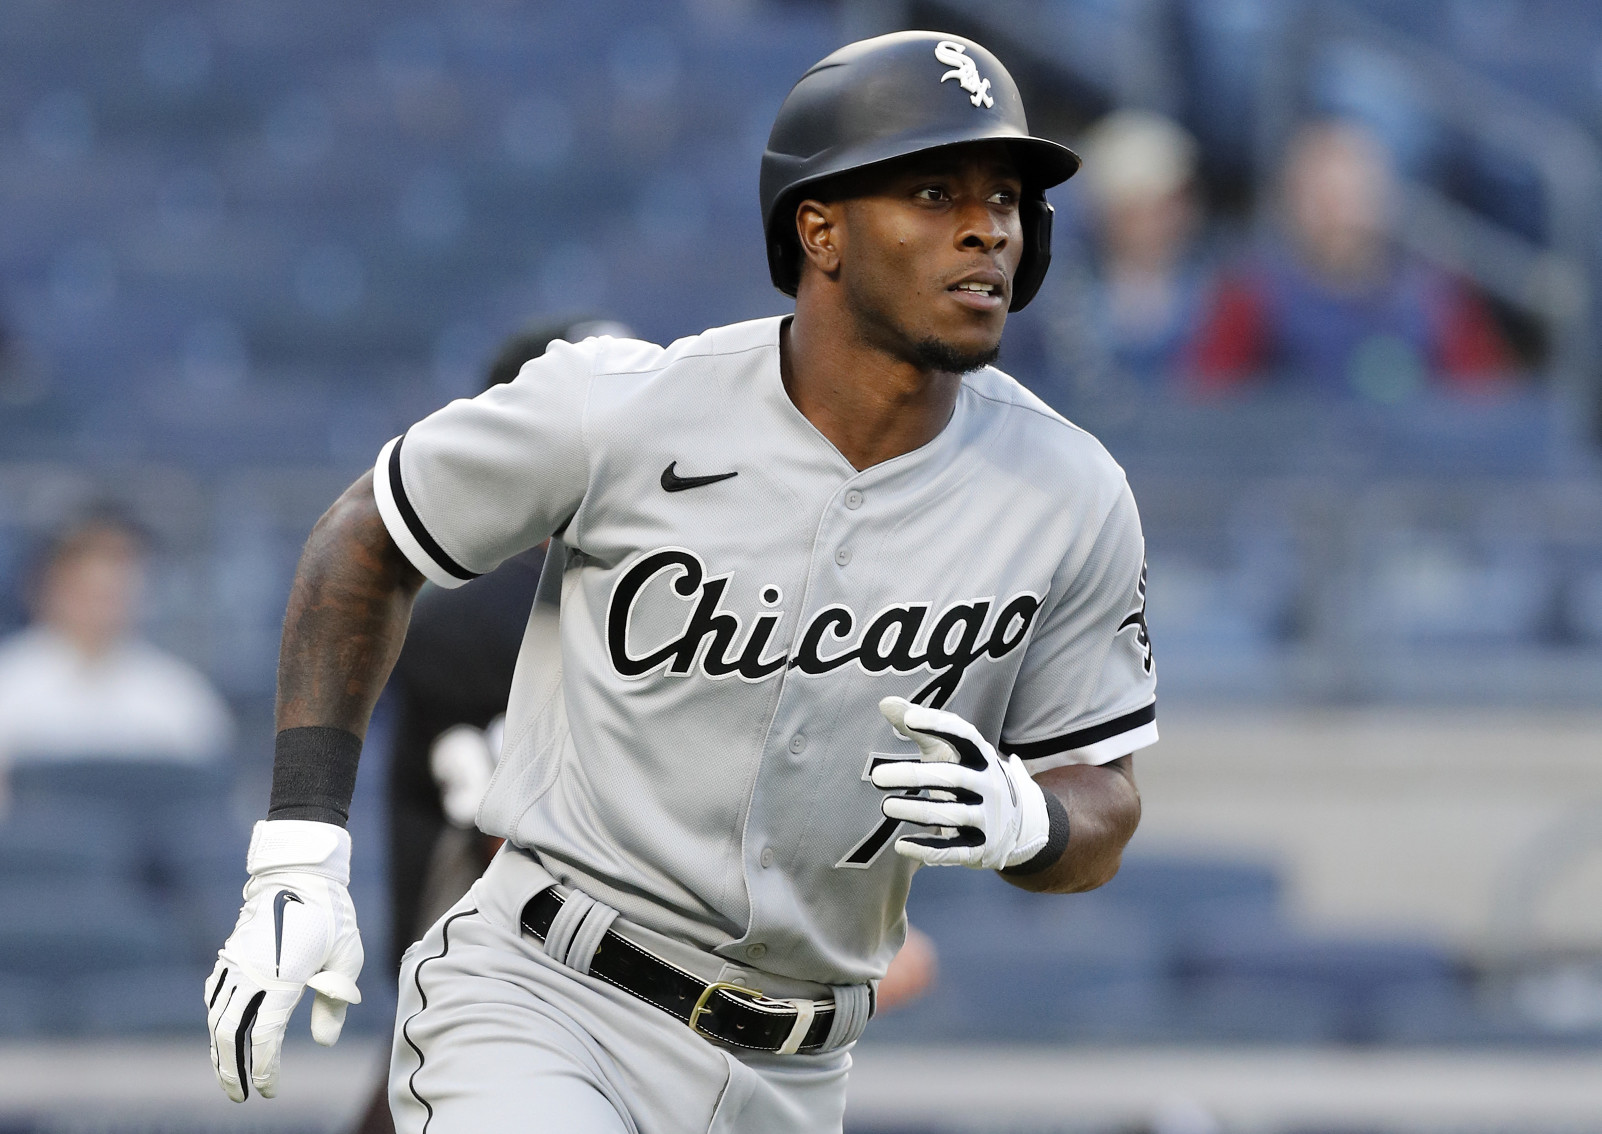 Nike, White Sox Push South Side Of Chicago To The Forefront With